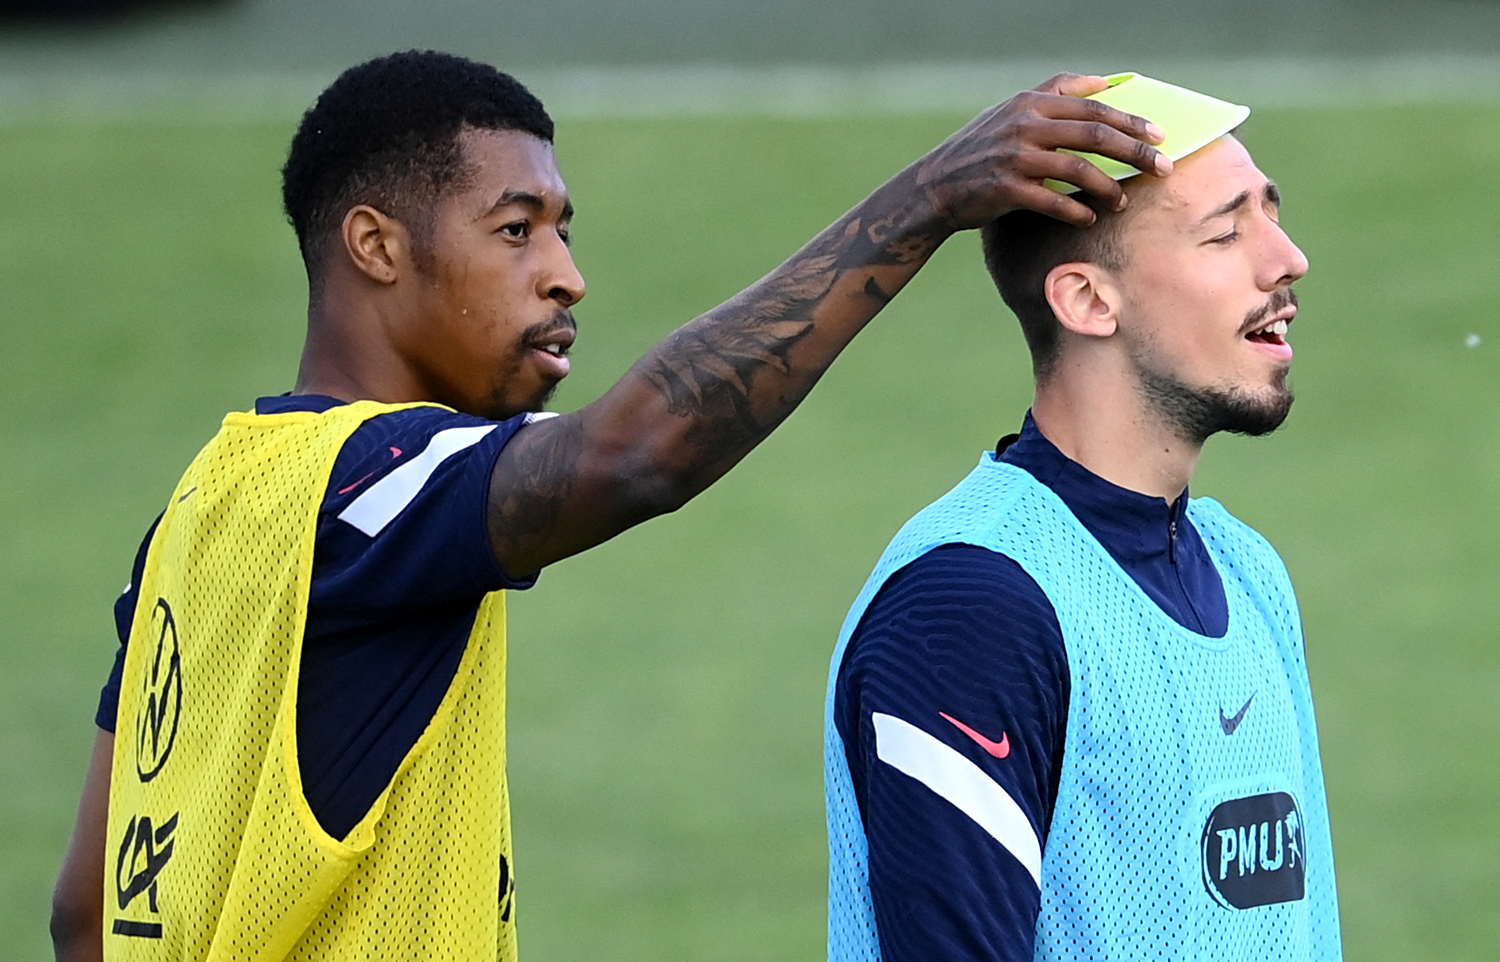 Presnel Kimpembe (L) jokes with France's Clement Lenglet during a training session.